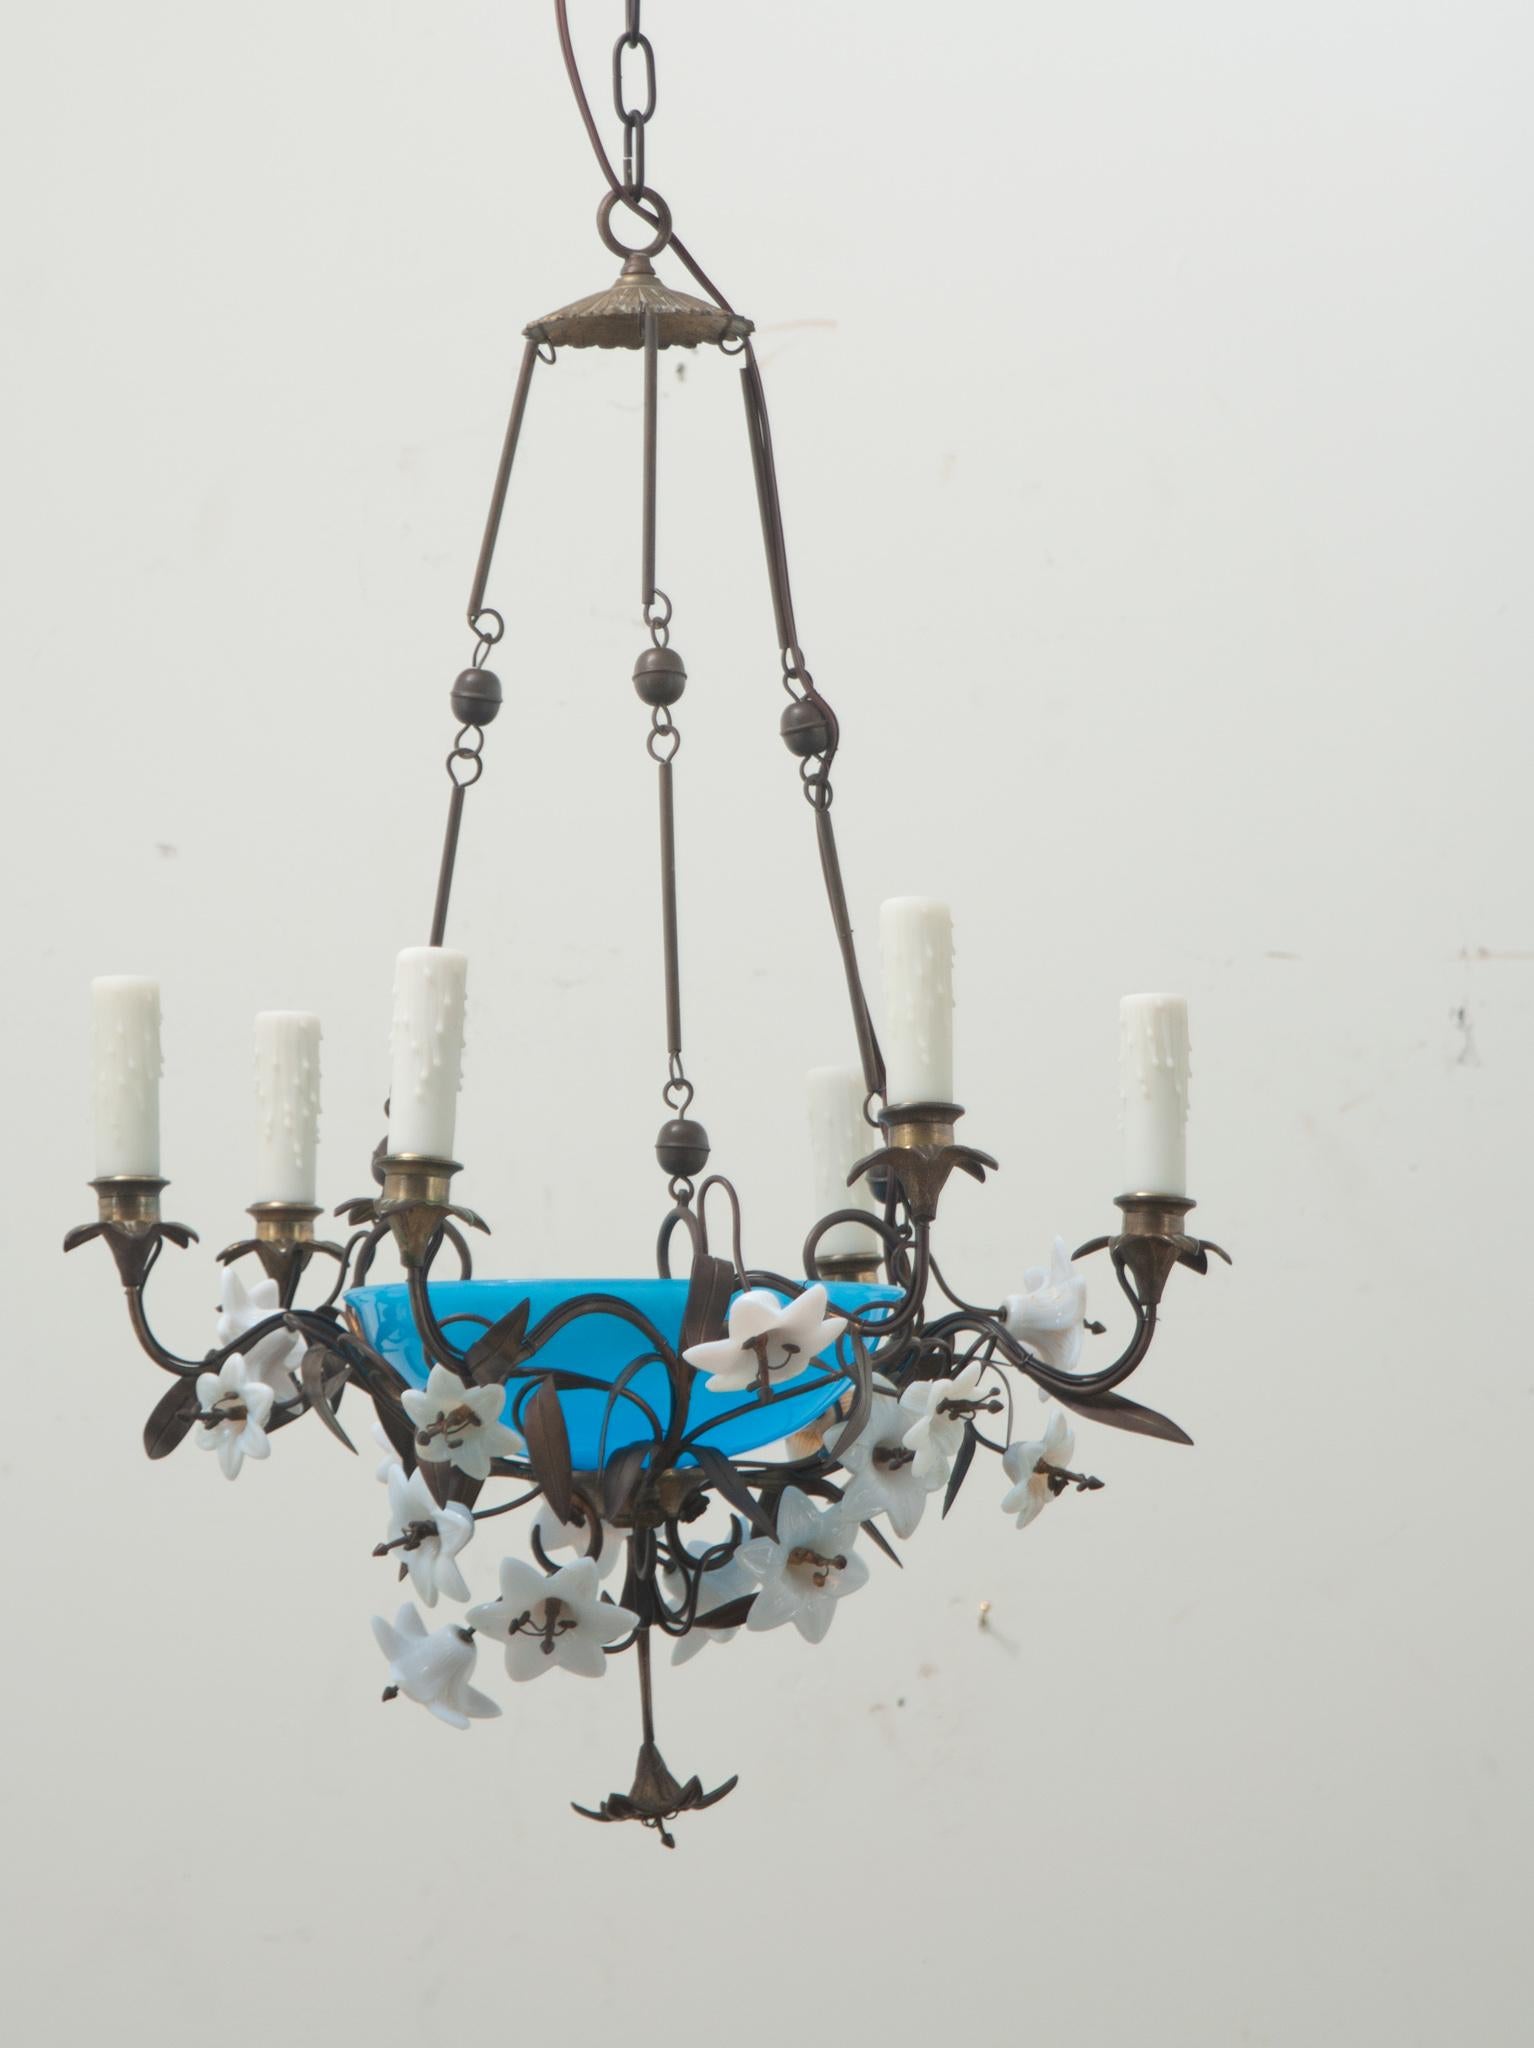 A vintage 7-light floral chandelier made in France. The fixture, most likely found in a church, has a bright blue opaline glass dish with a bulb inside and is surrounded by milk glass and bronze flowers, and has six curving arms with faux candle